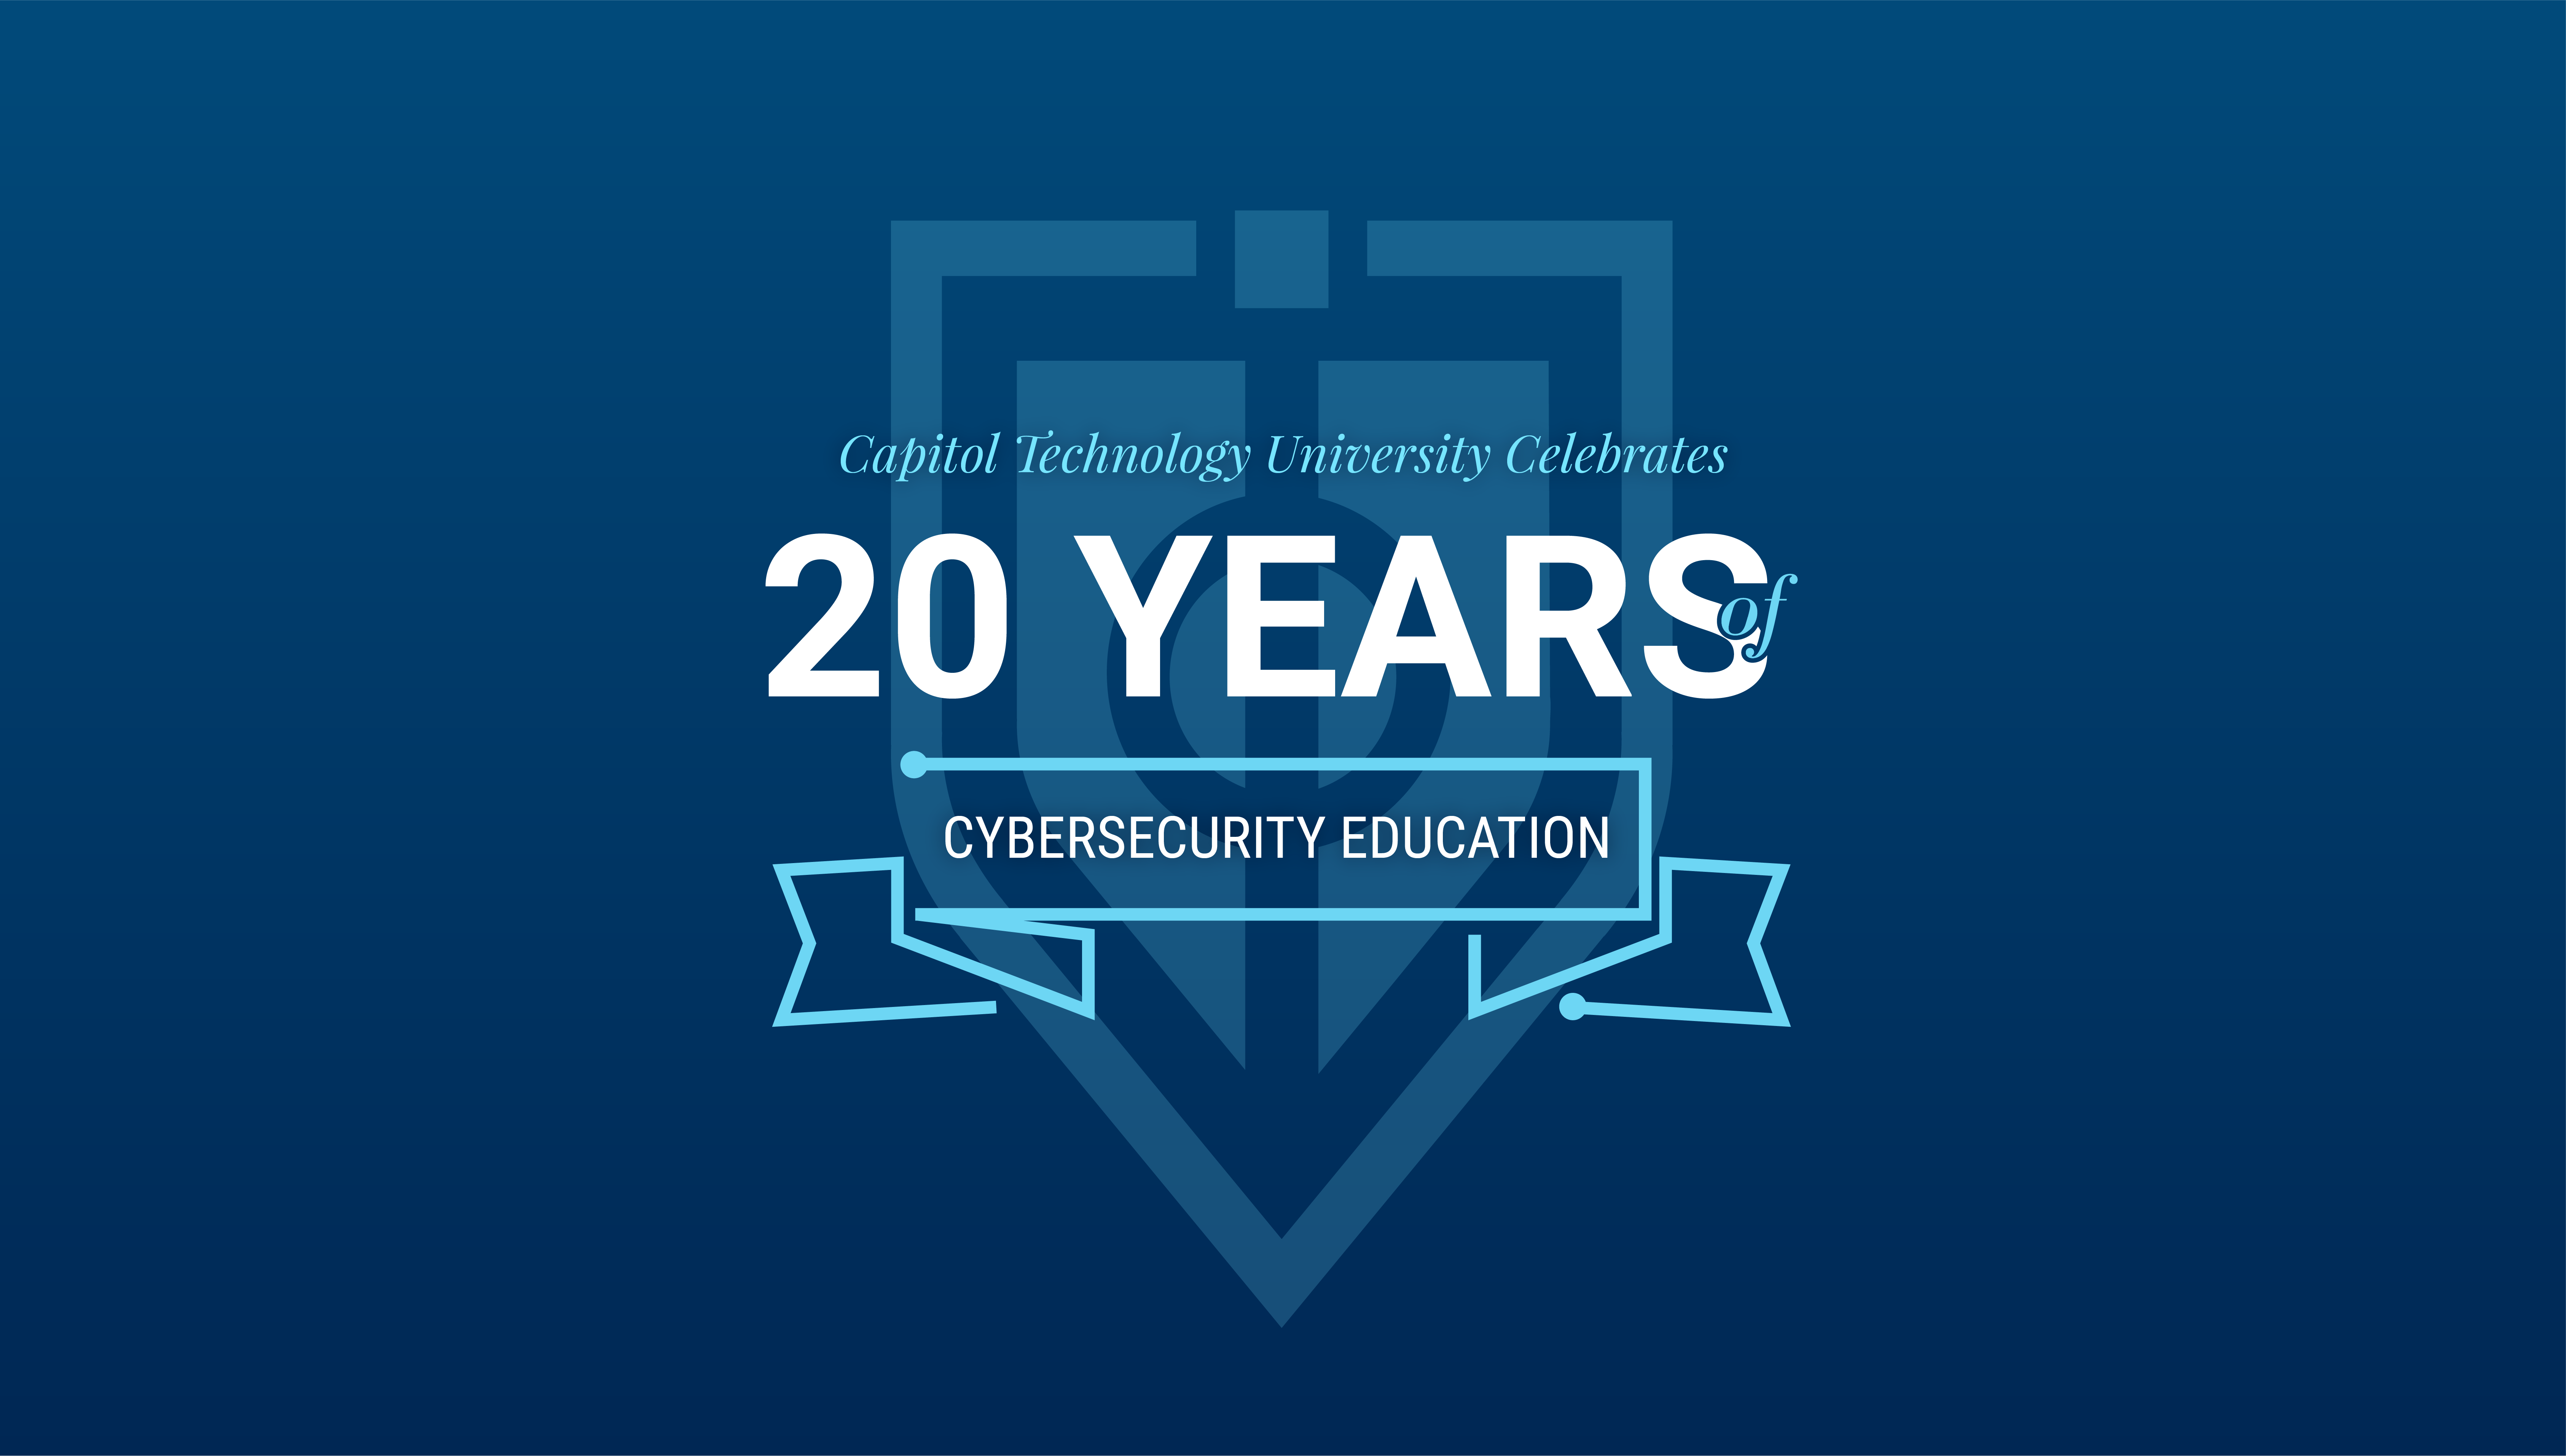 Celebrating 20 Years of Cyber